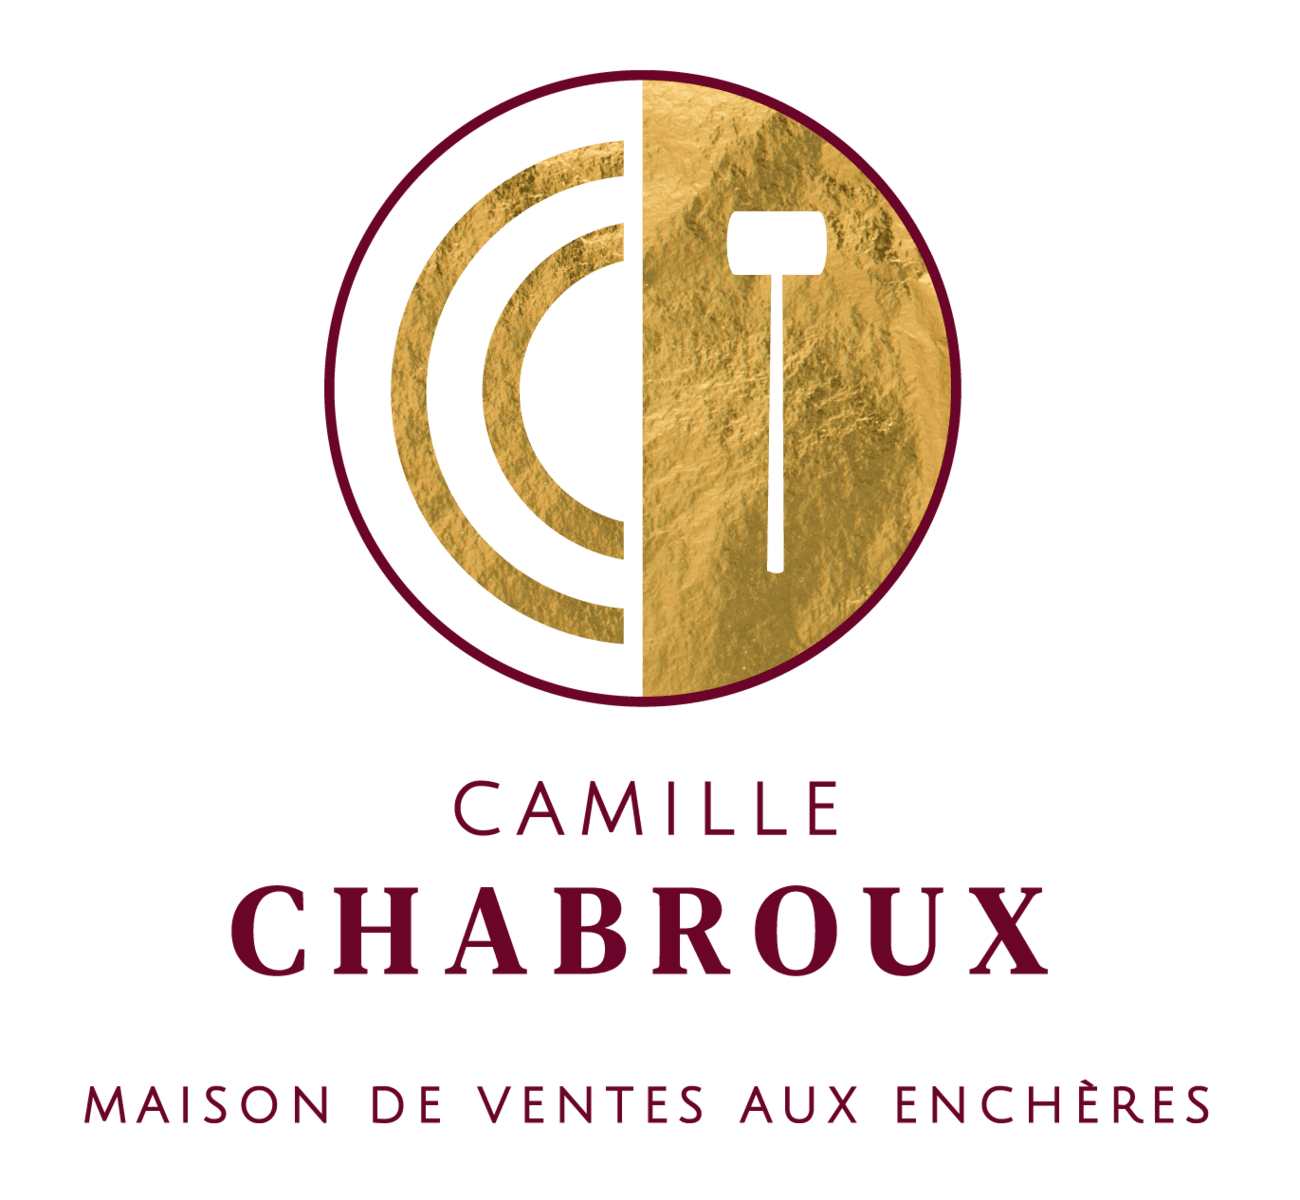 Camille chabroux logo SITE